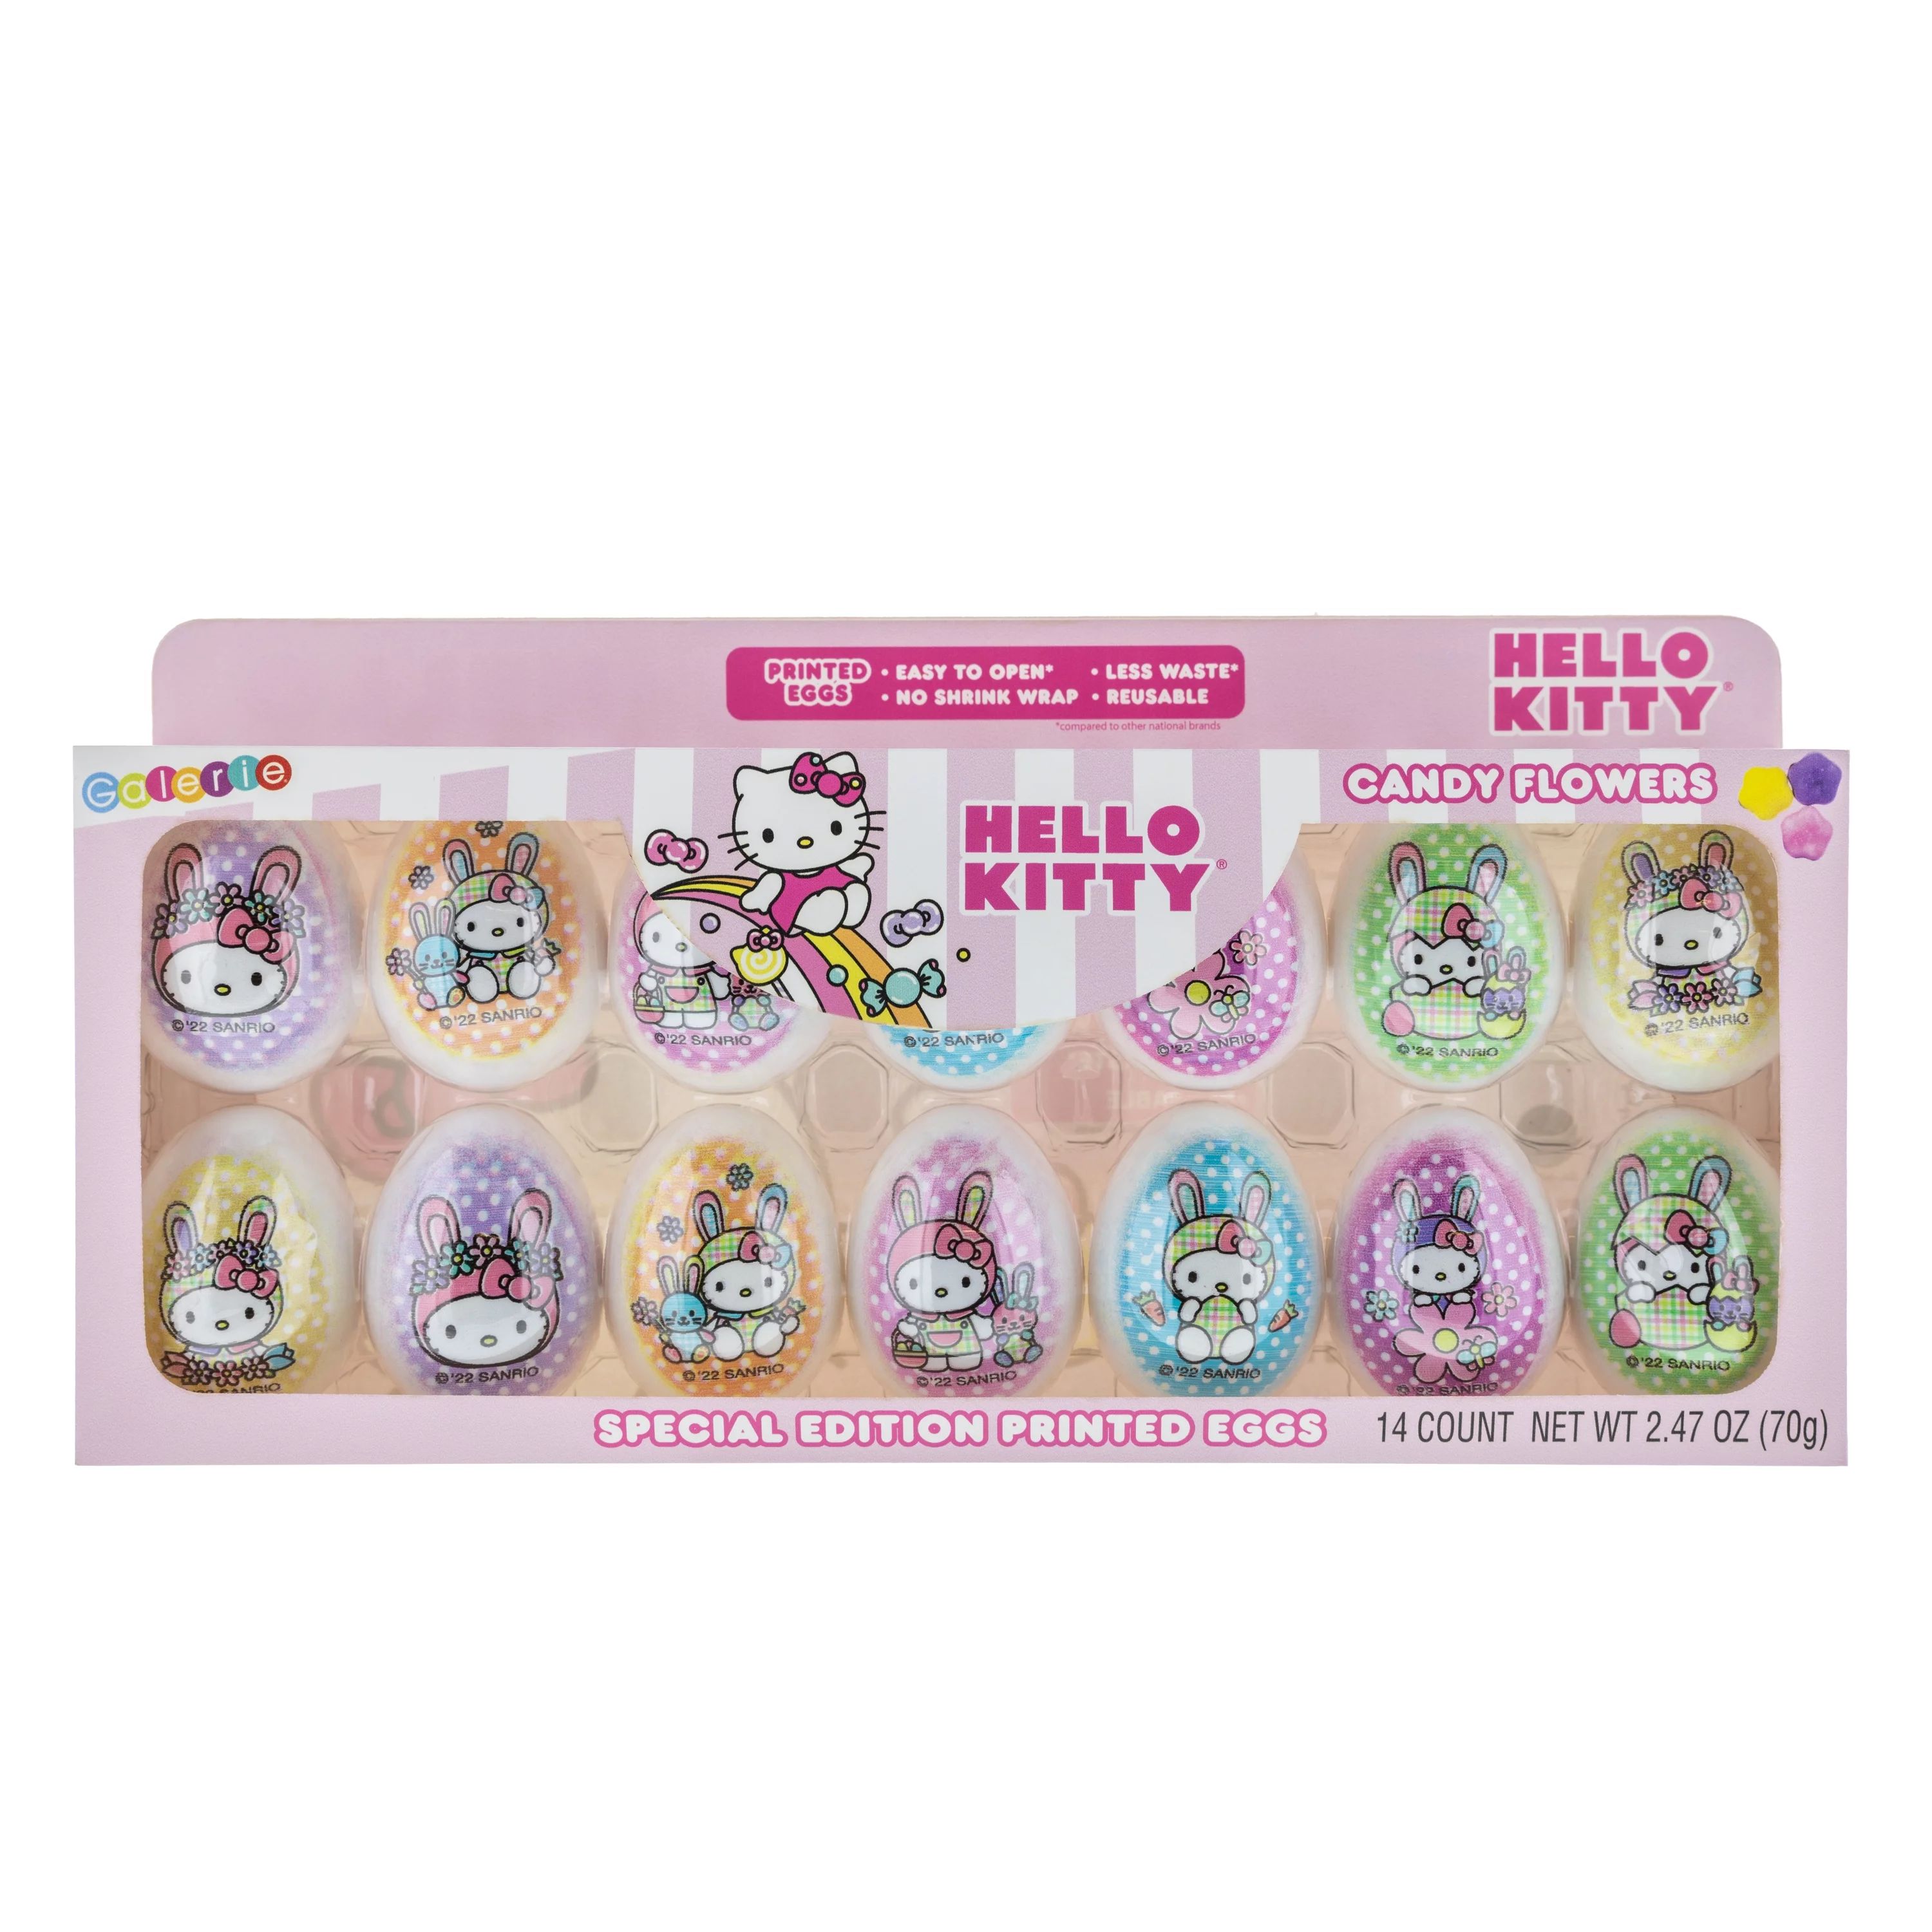 Galerie Hello Kitty® 14 Count Special Edition Printed Eggs with Candy, 2.47 oz | Walmart (US)